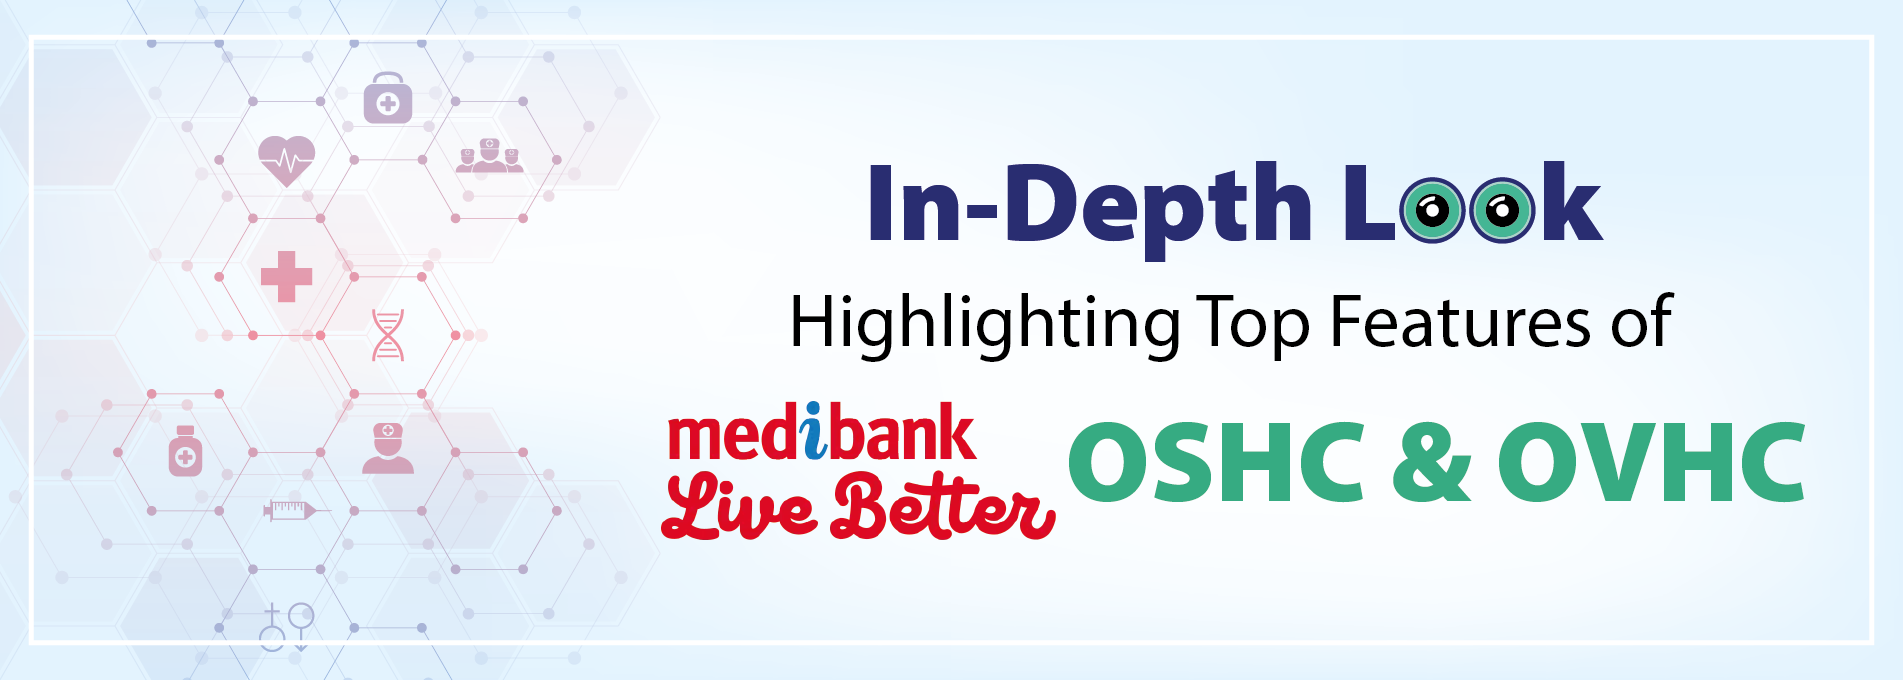 In-Depth Look: Highlighting Top Features of Medibank OSHC & OVHC